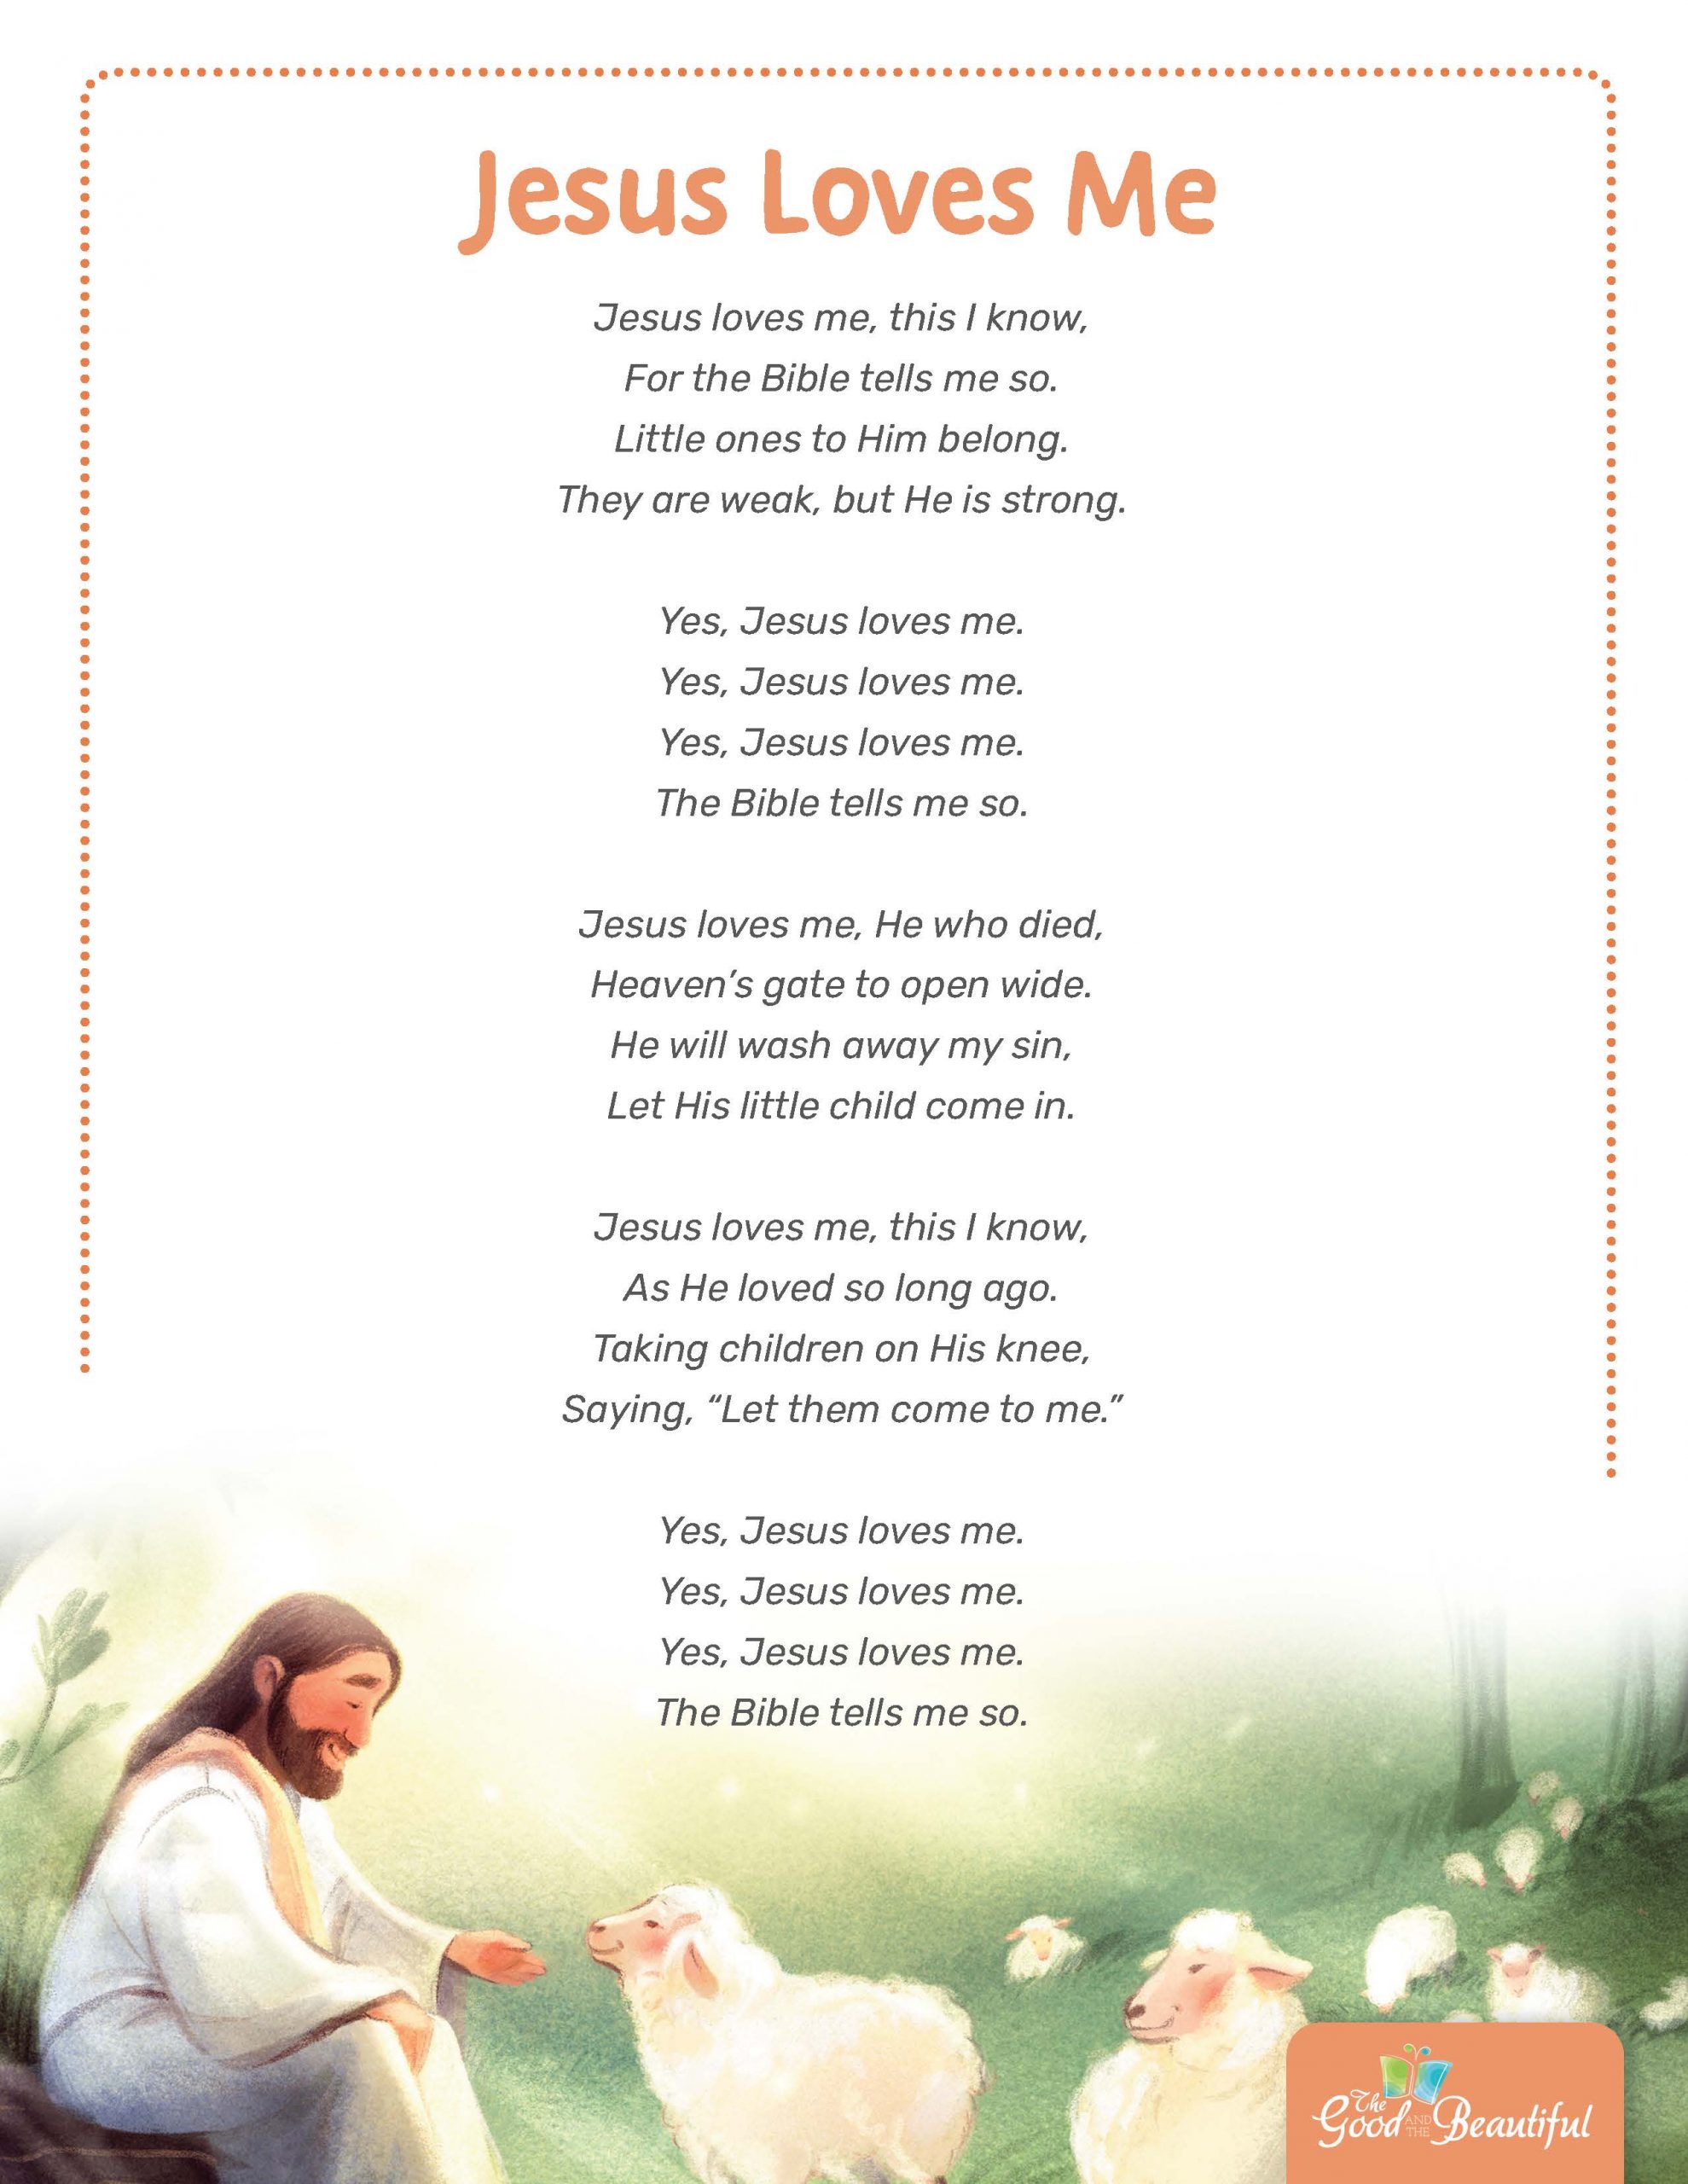 Nursery Rhyme Songs Jesus Loves Me The Good And The Beautiful